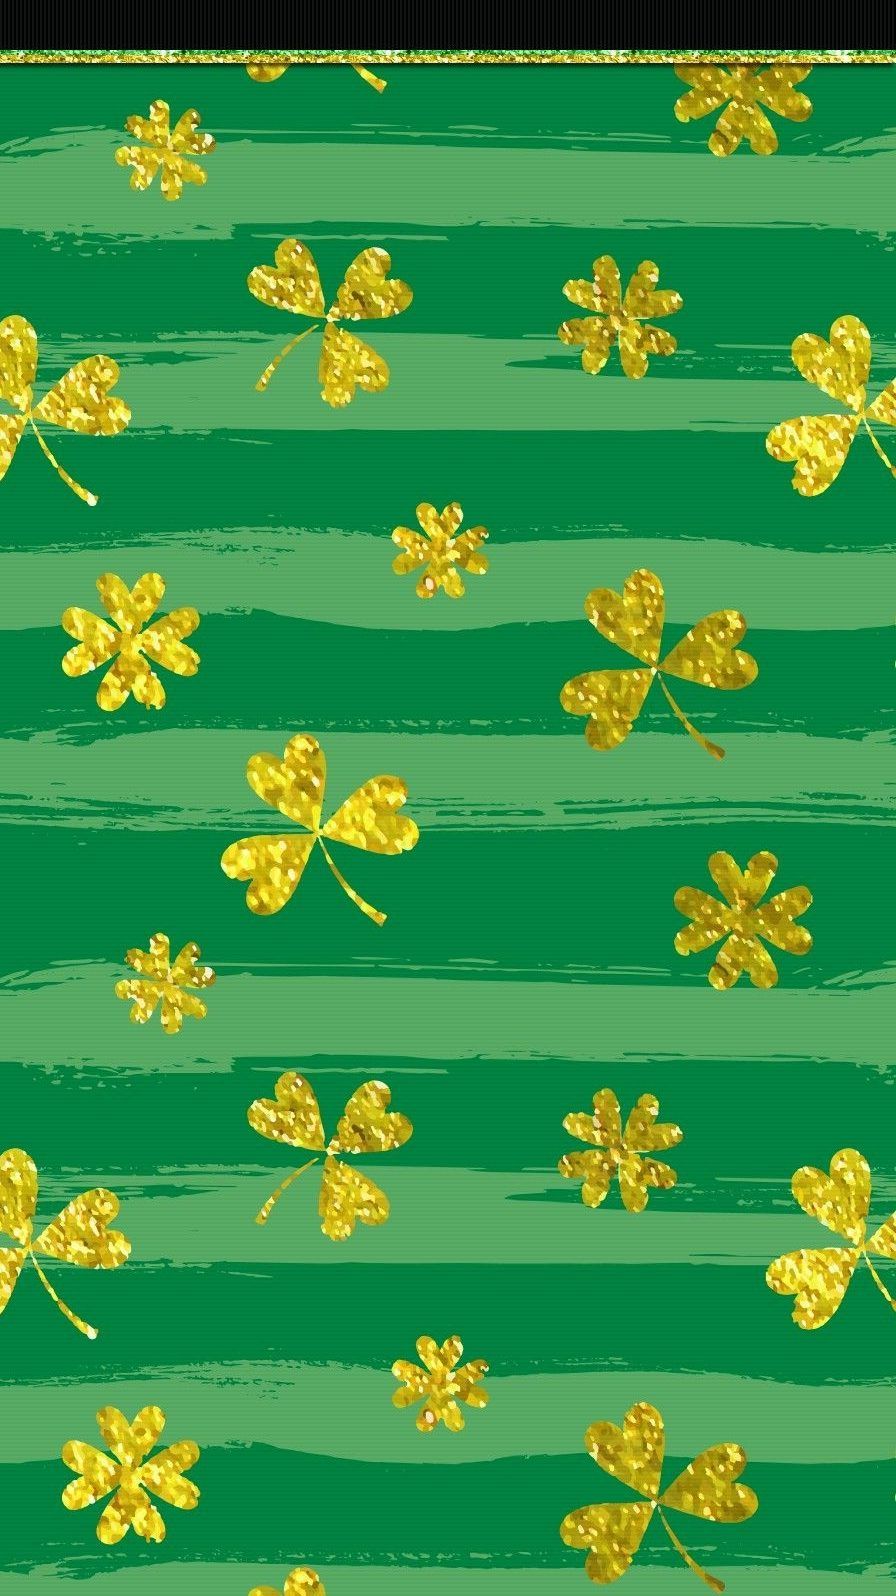 Best 10 iPhone Wallpaper for St. Patrick's Day 2020. Do It Before Me